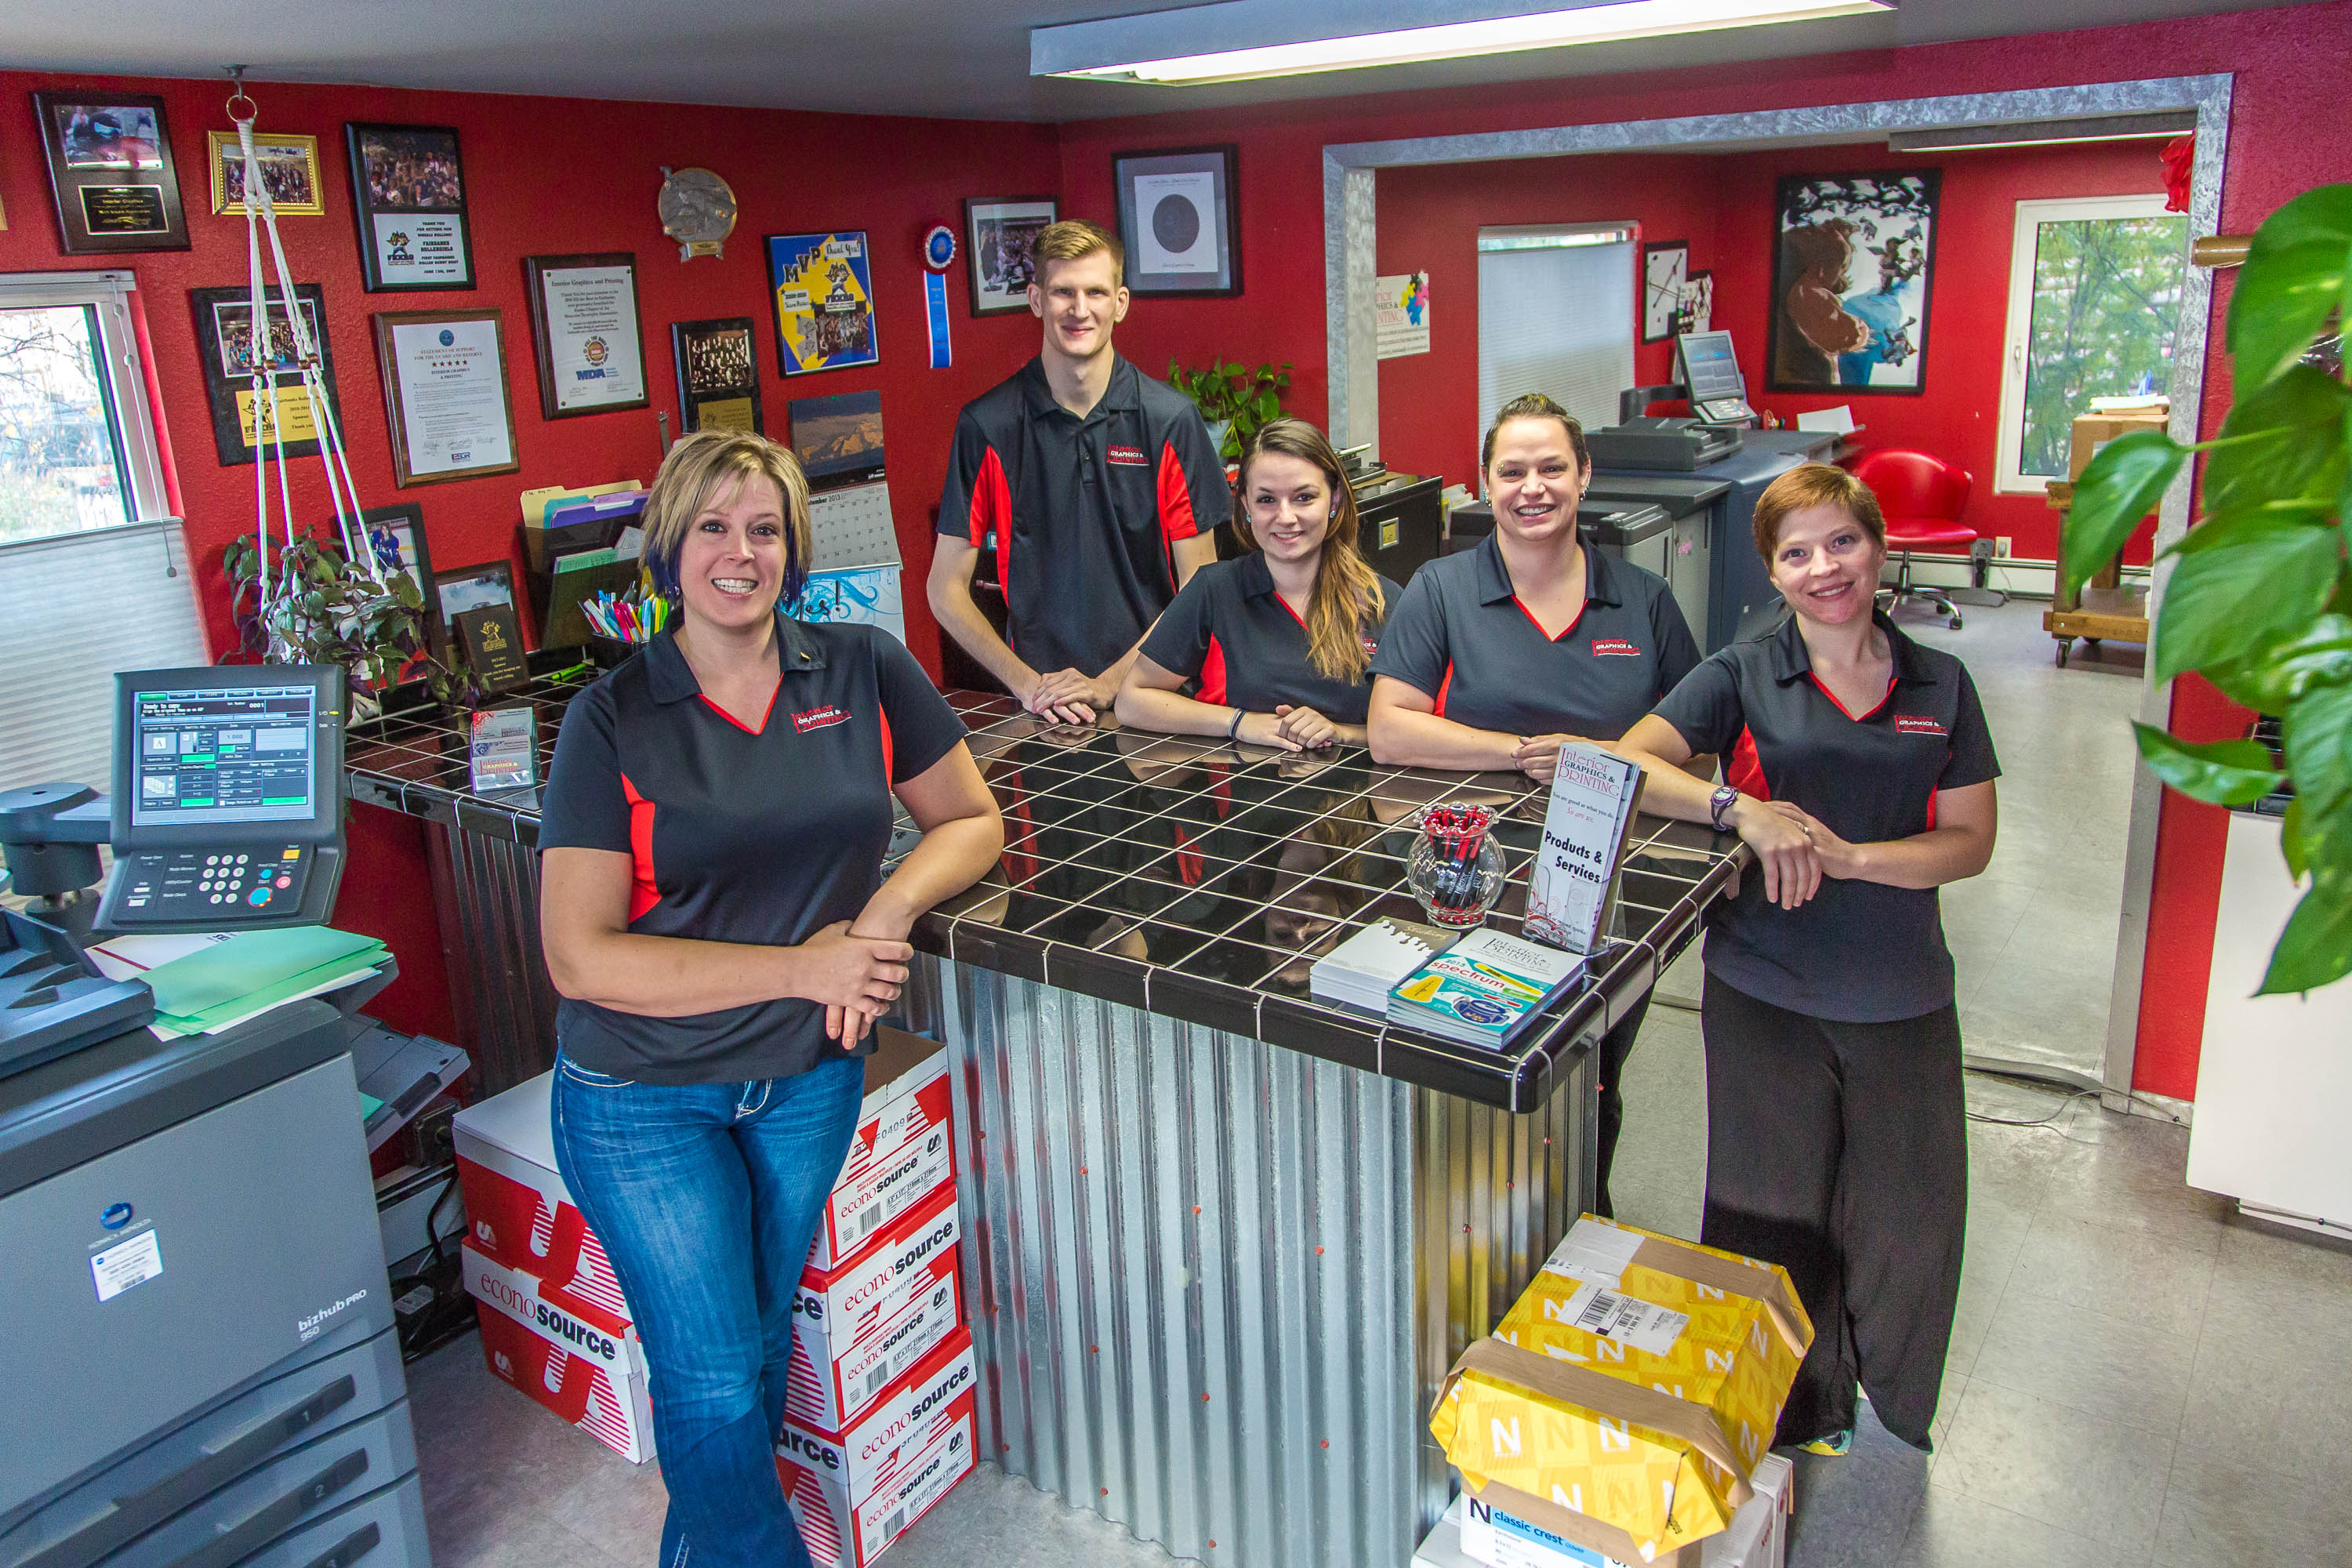 The team at Interior Graphics & Printing, including Michelle Maynor (left) and Suzie Avant (third from left). Photo by Todd Paris, Paris Photographics.